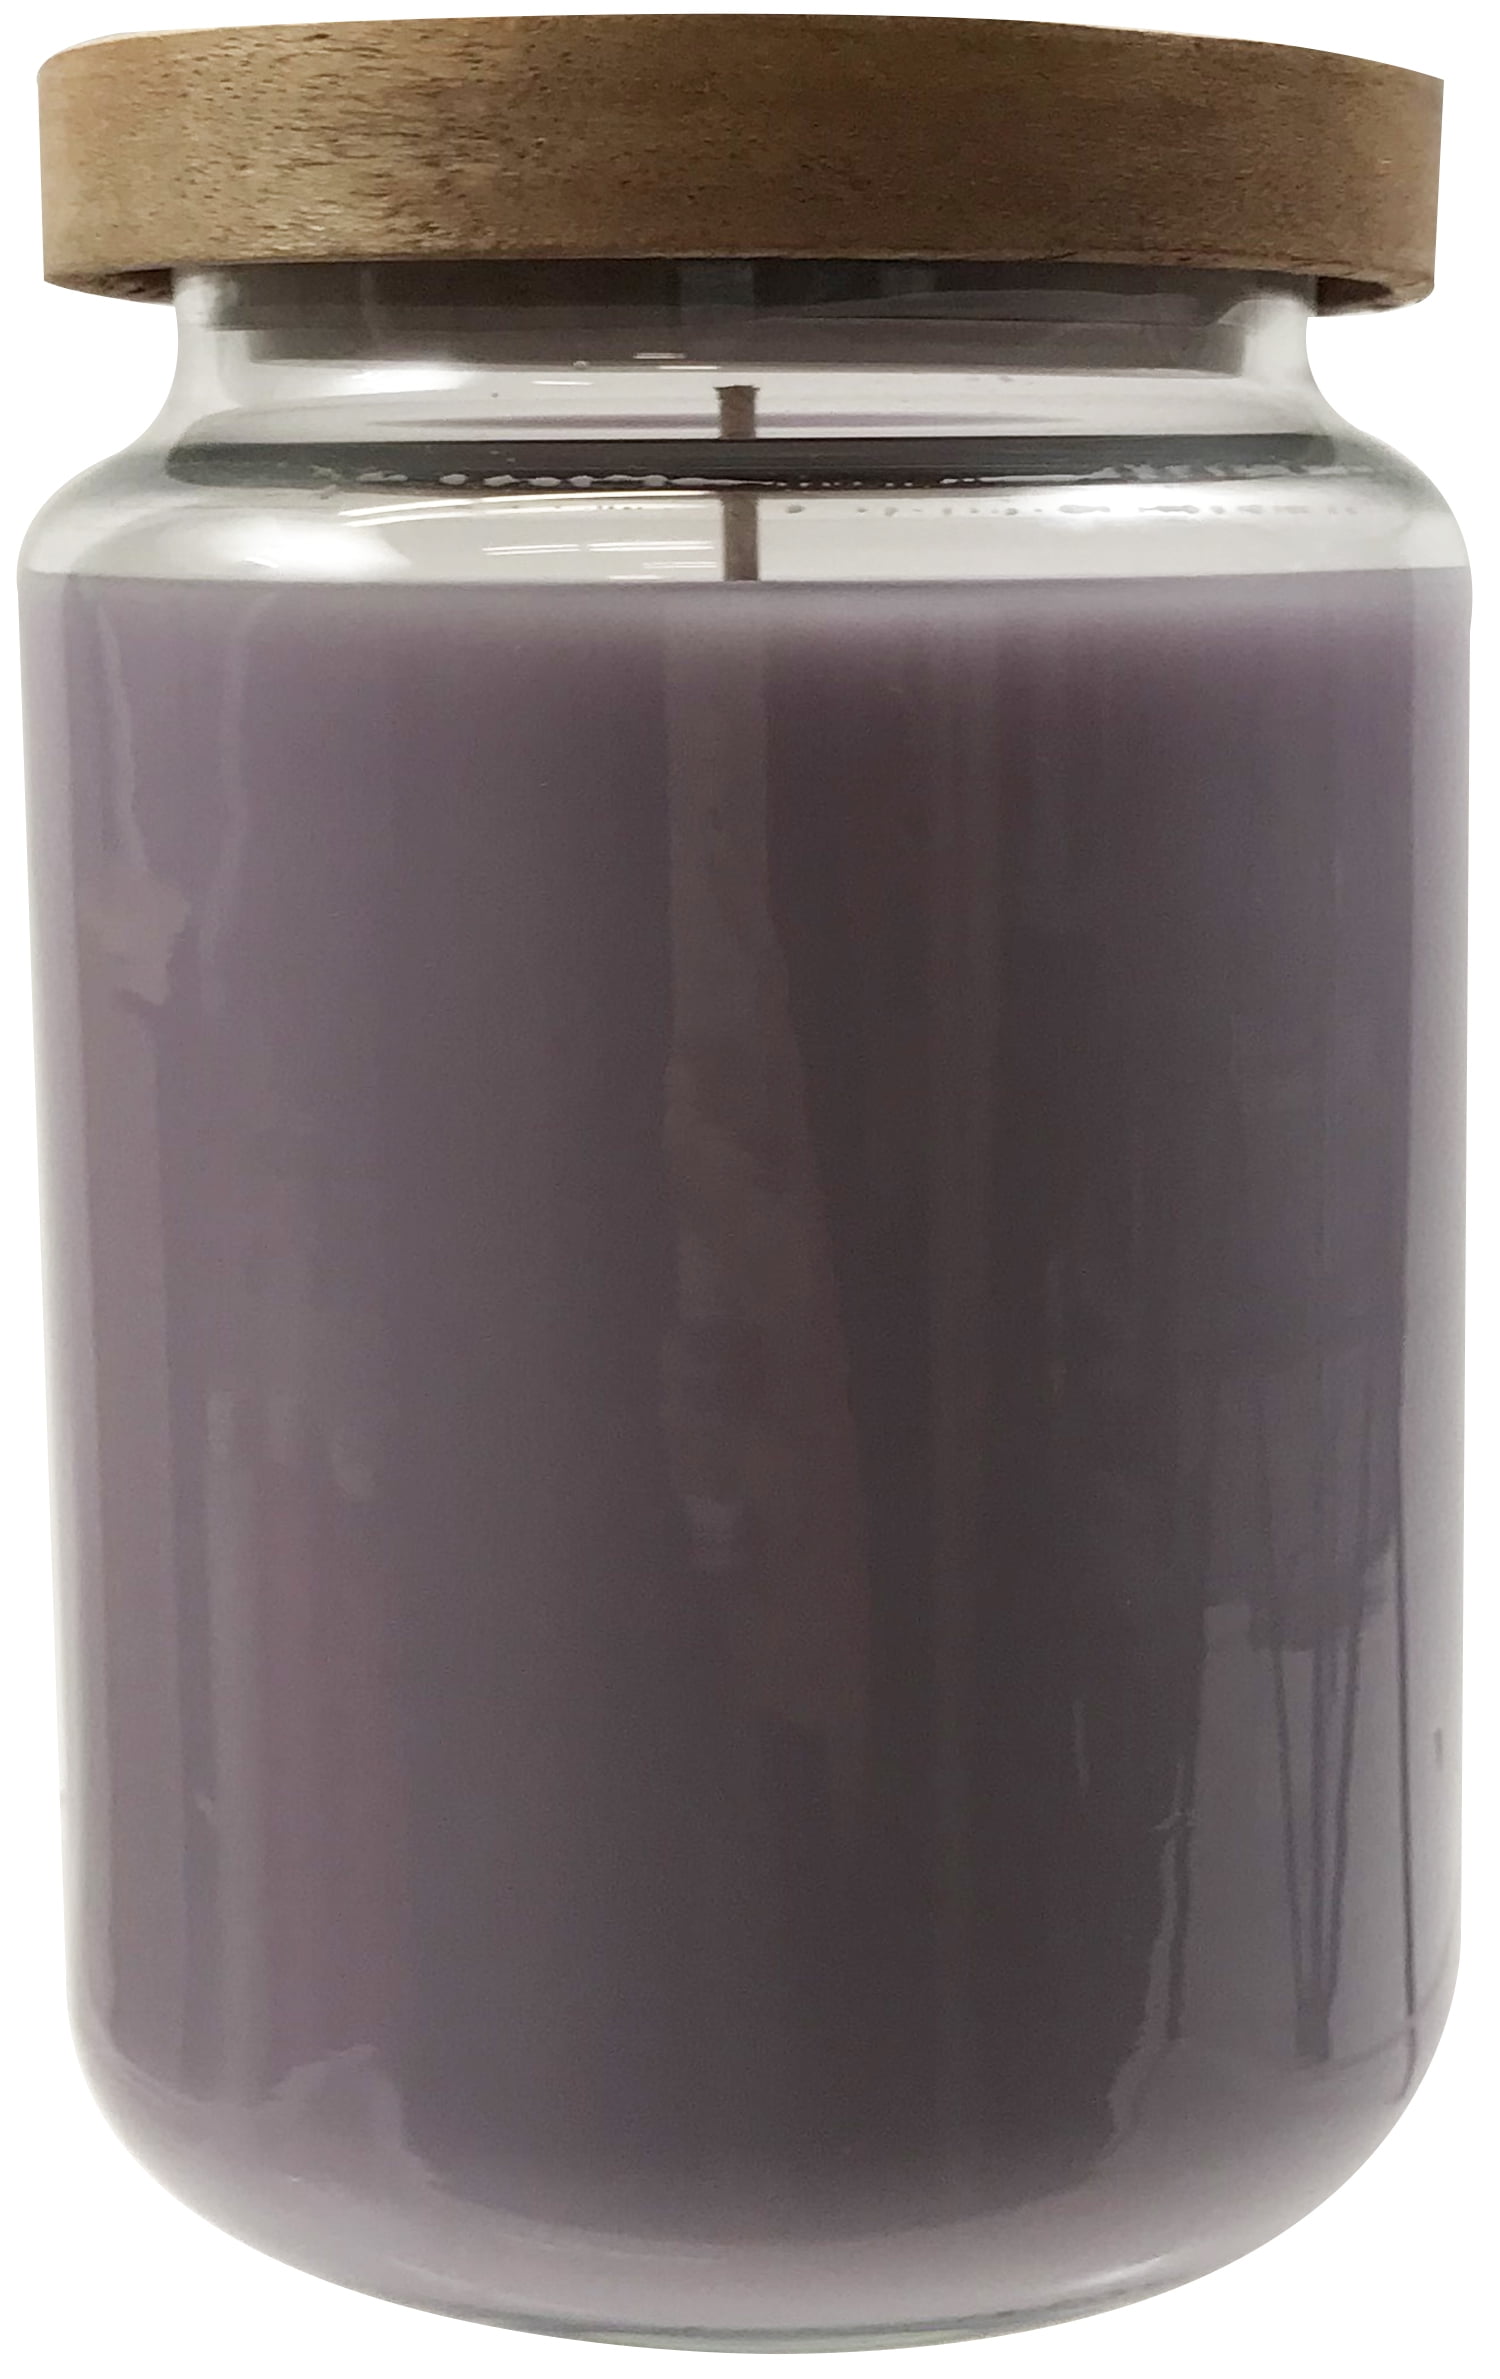 Welder Wings Scented Candle in Amber Jar